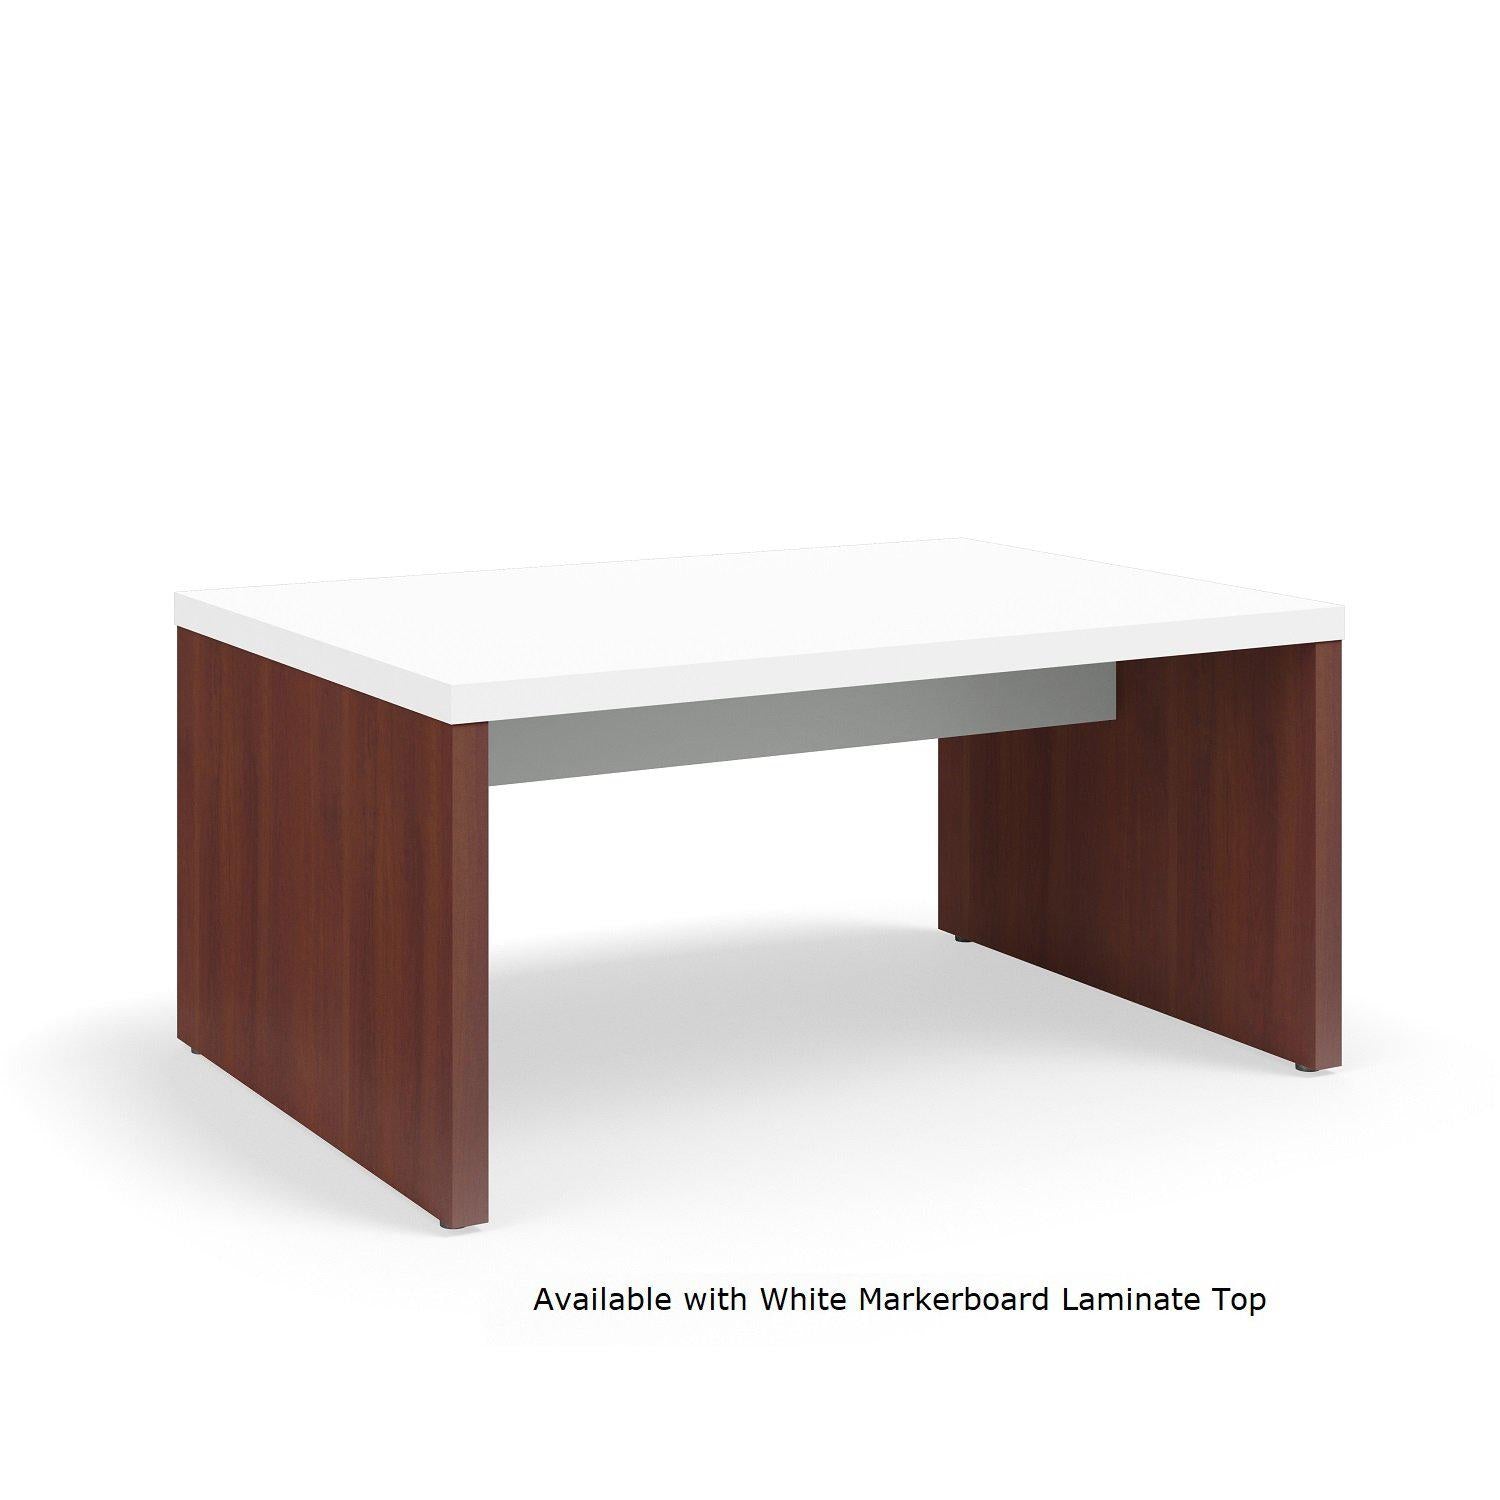 Serenade Gathering Table, Standard Height, Double-Sided, 42" x 60" x 29"H, Contrast Laminate, FREE SHIPPING